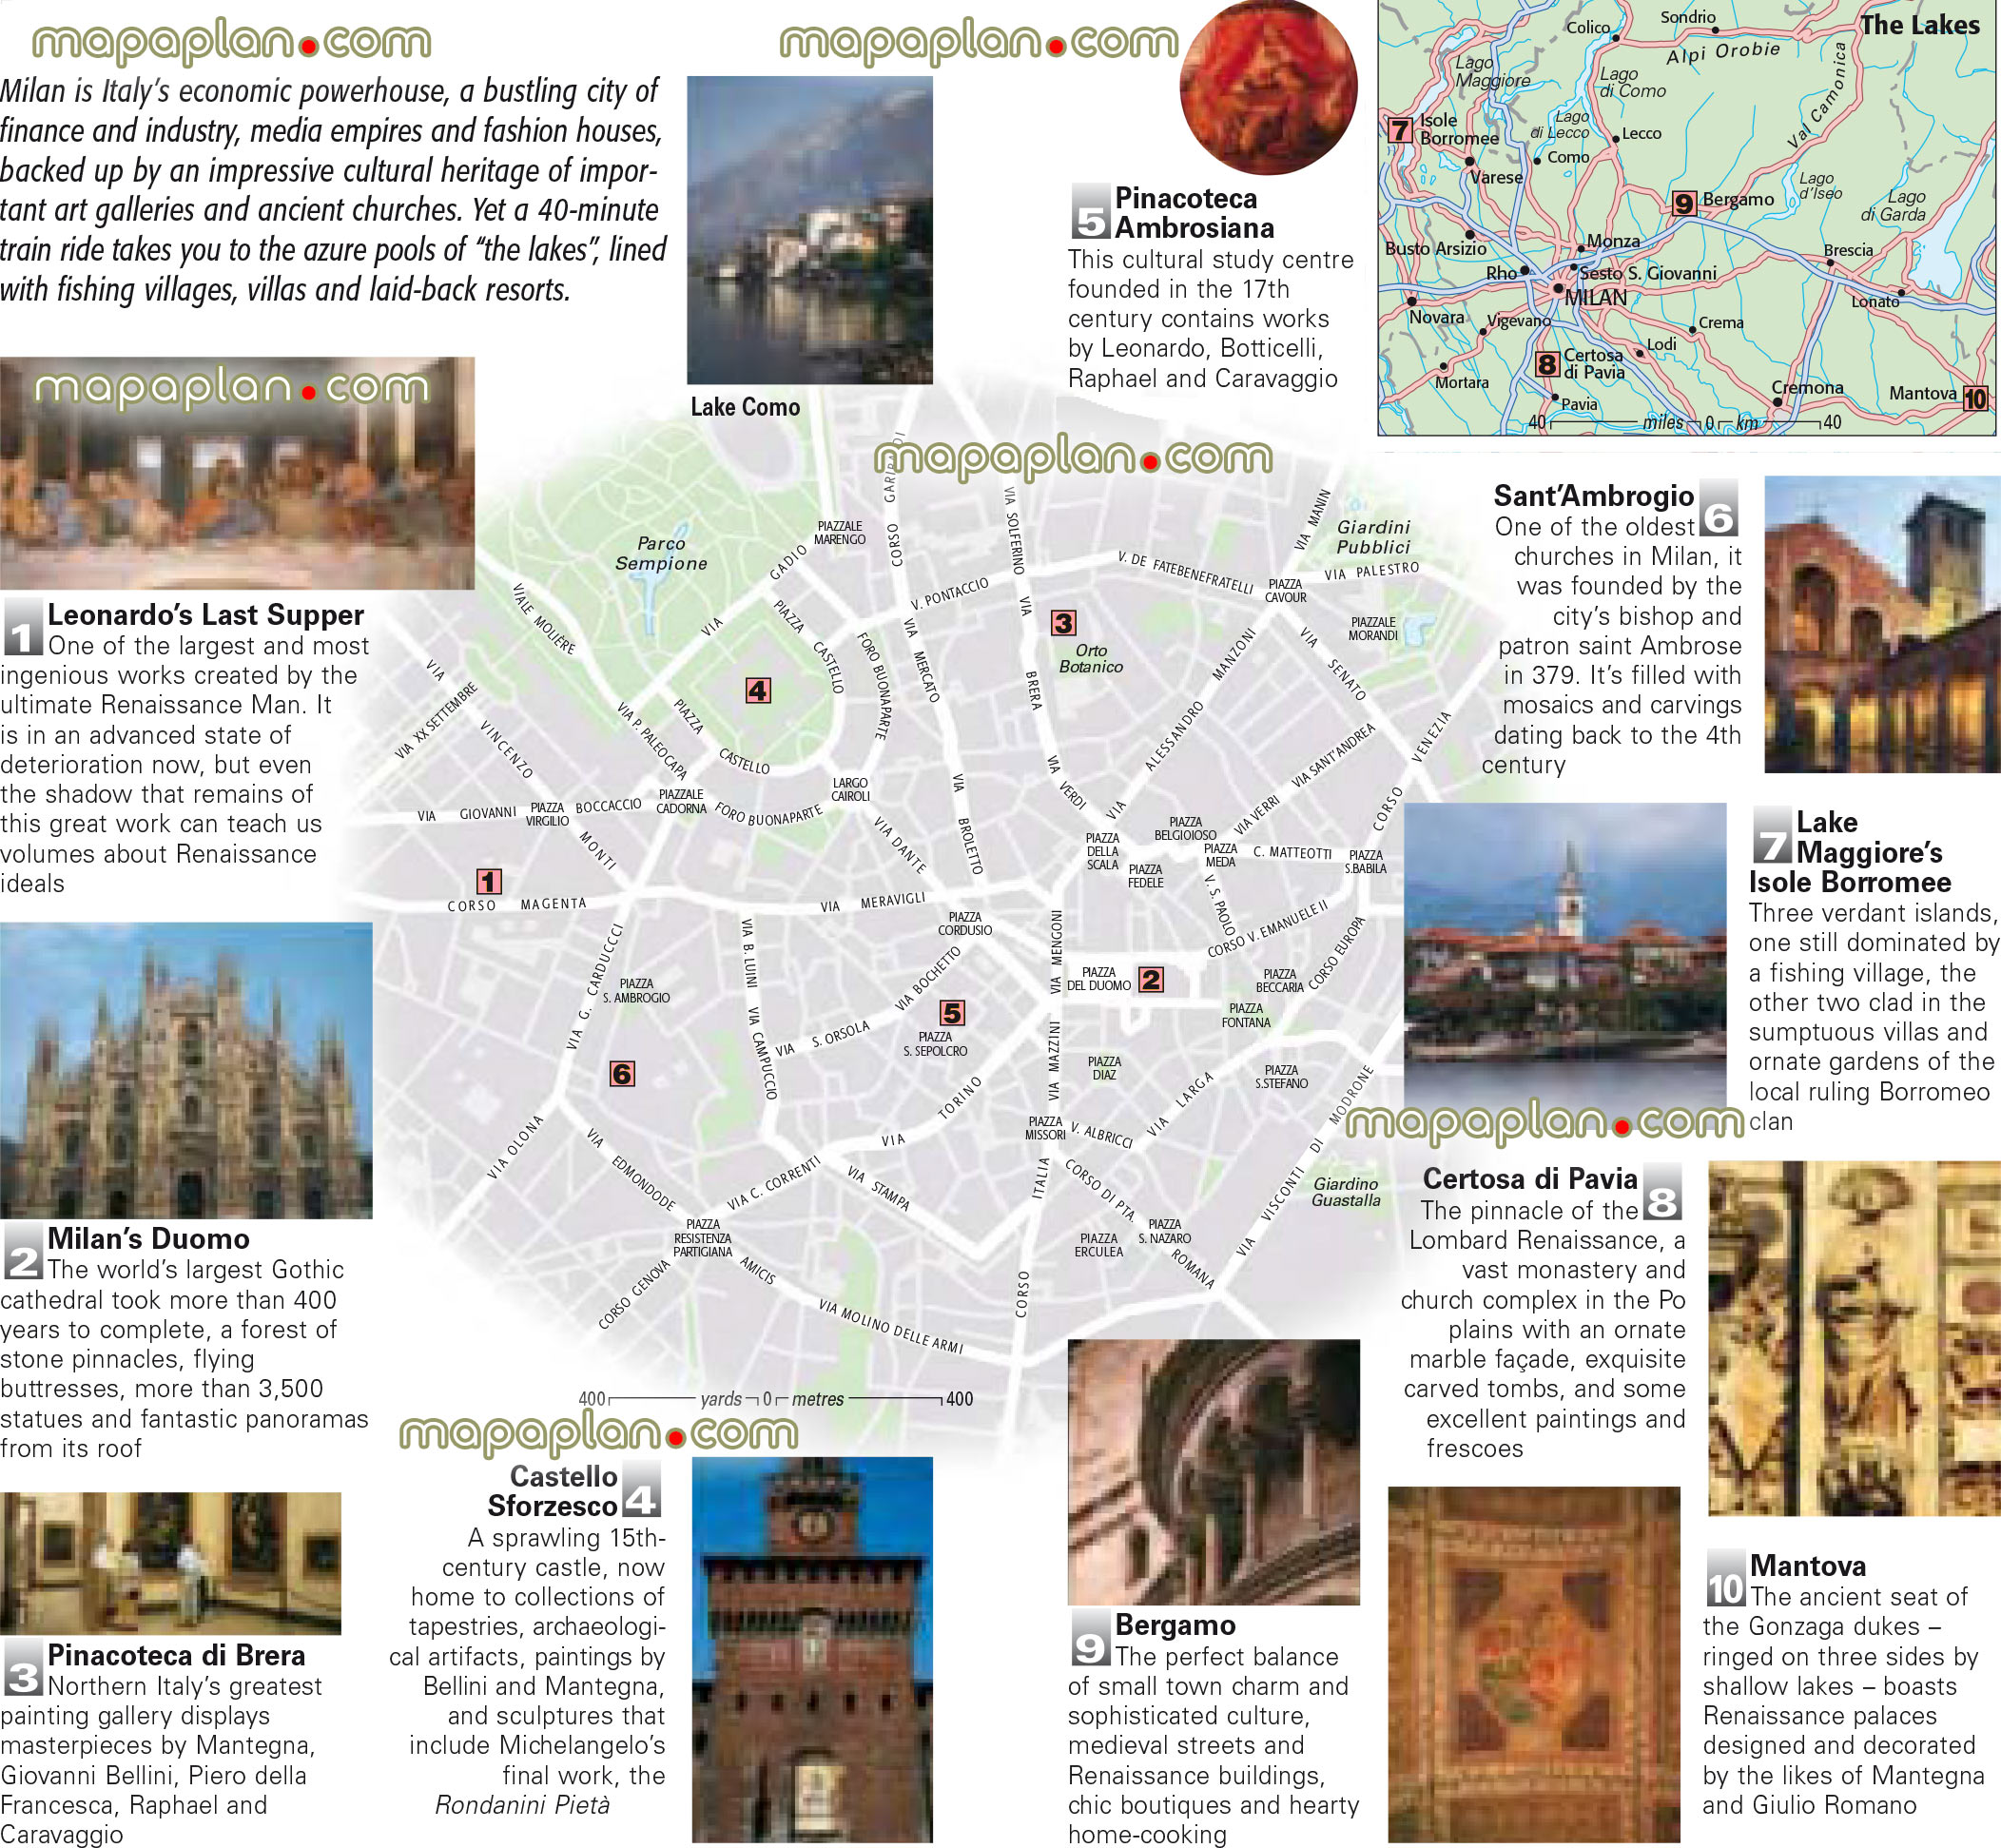 milan city centre free travel guide top 10 must see sights best destinationss Milan Top tourist attractions map